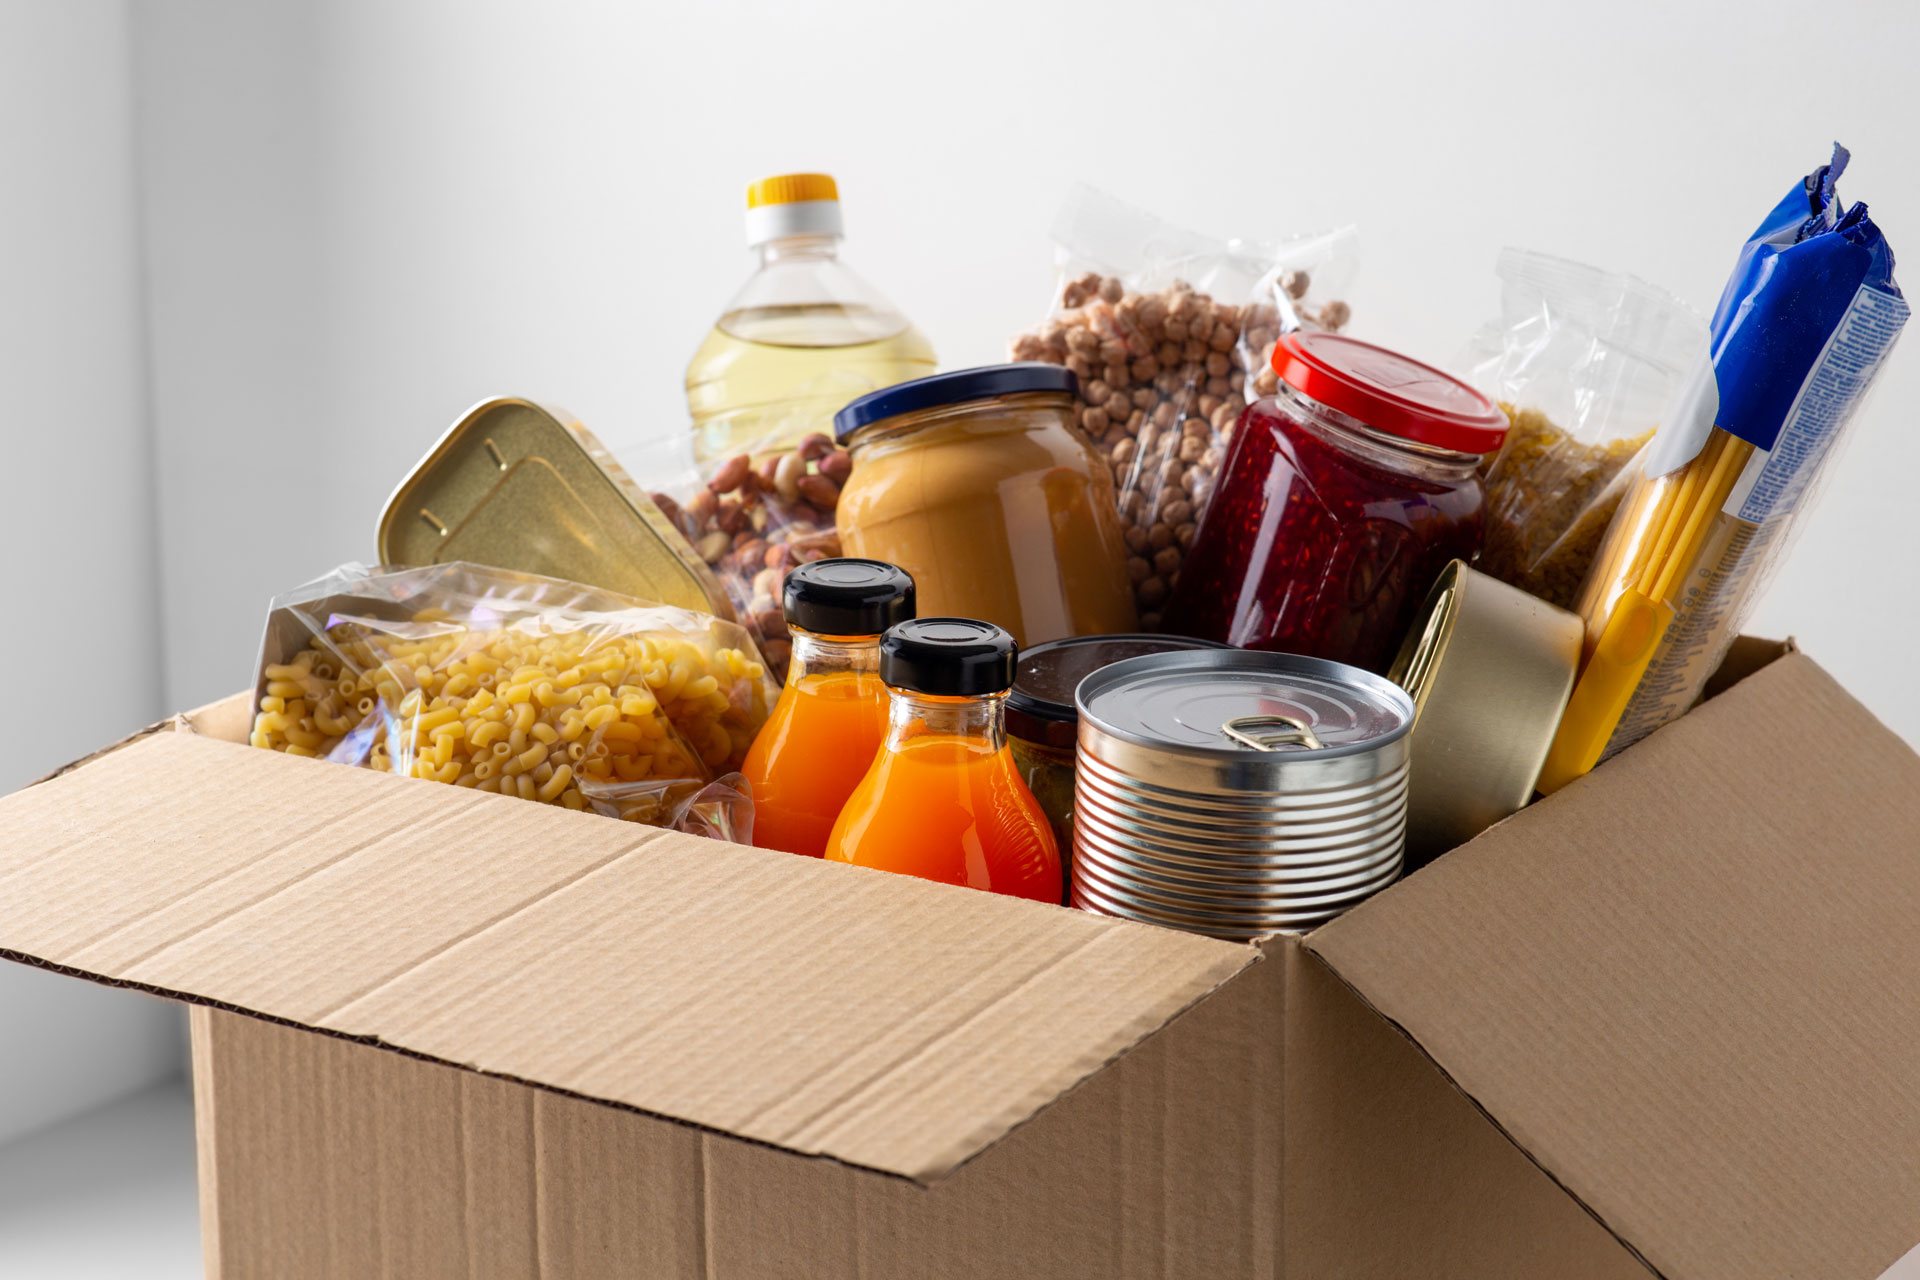 dry goods and canned food in cardboard box